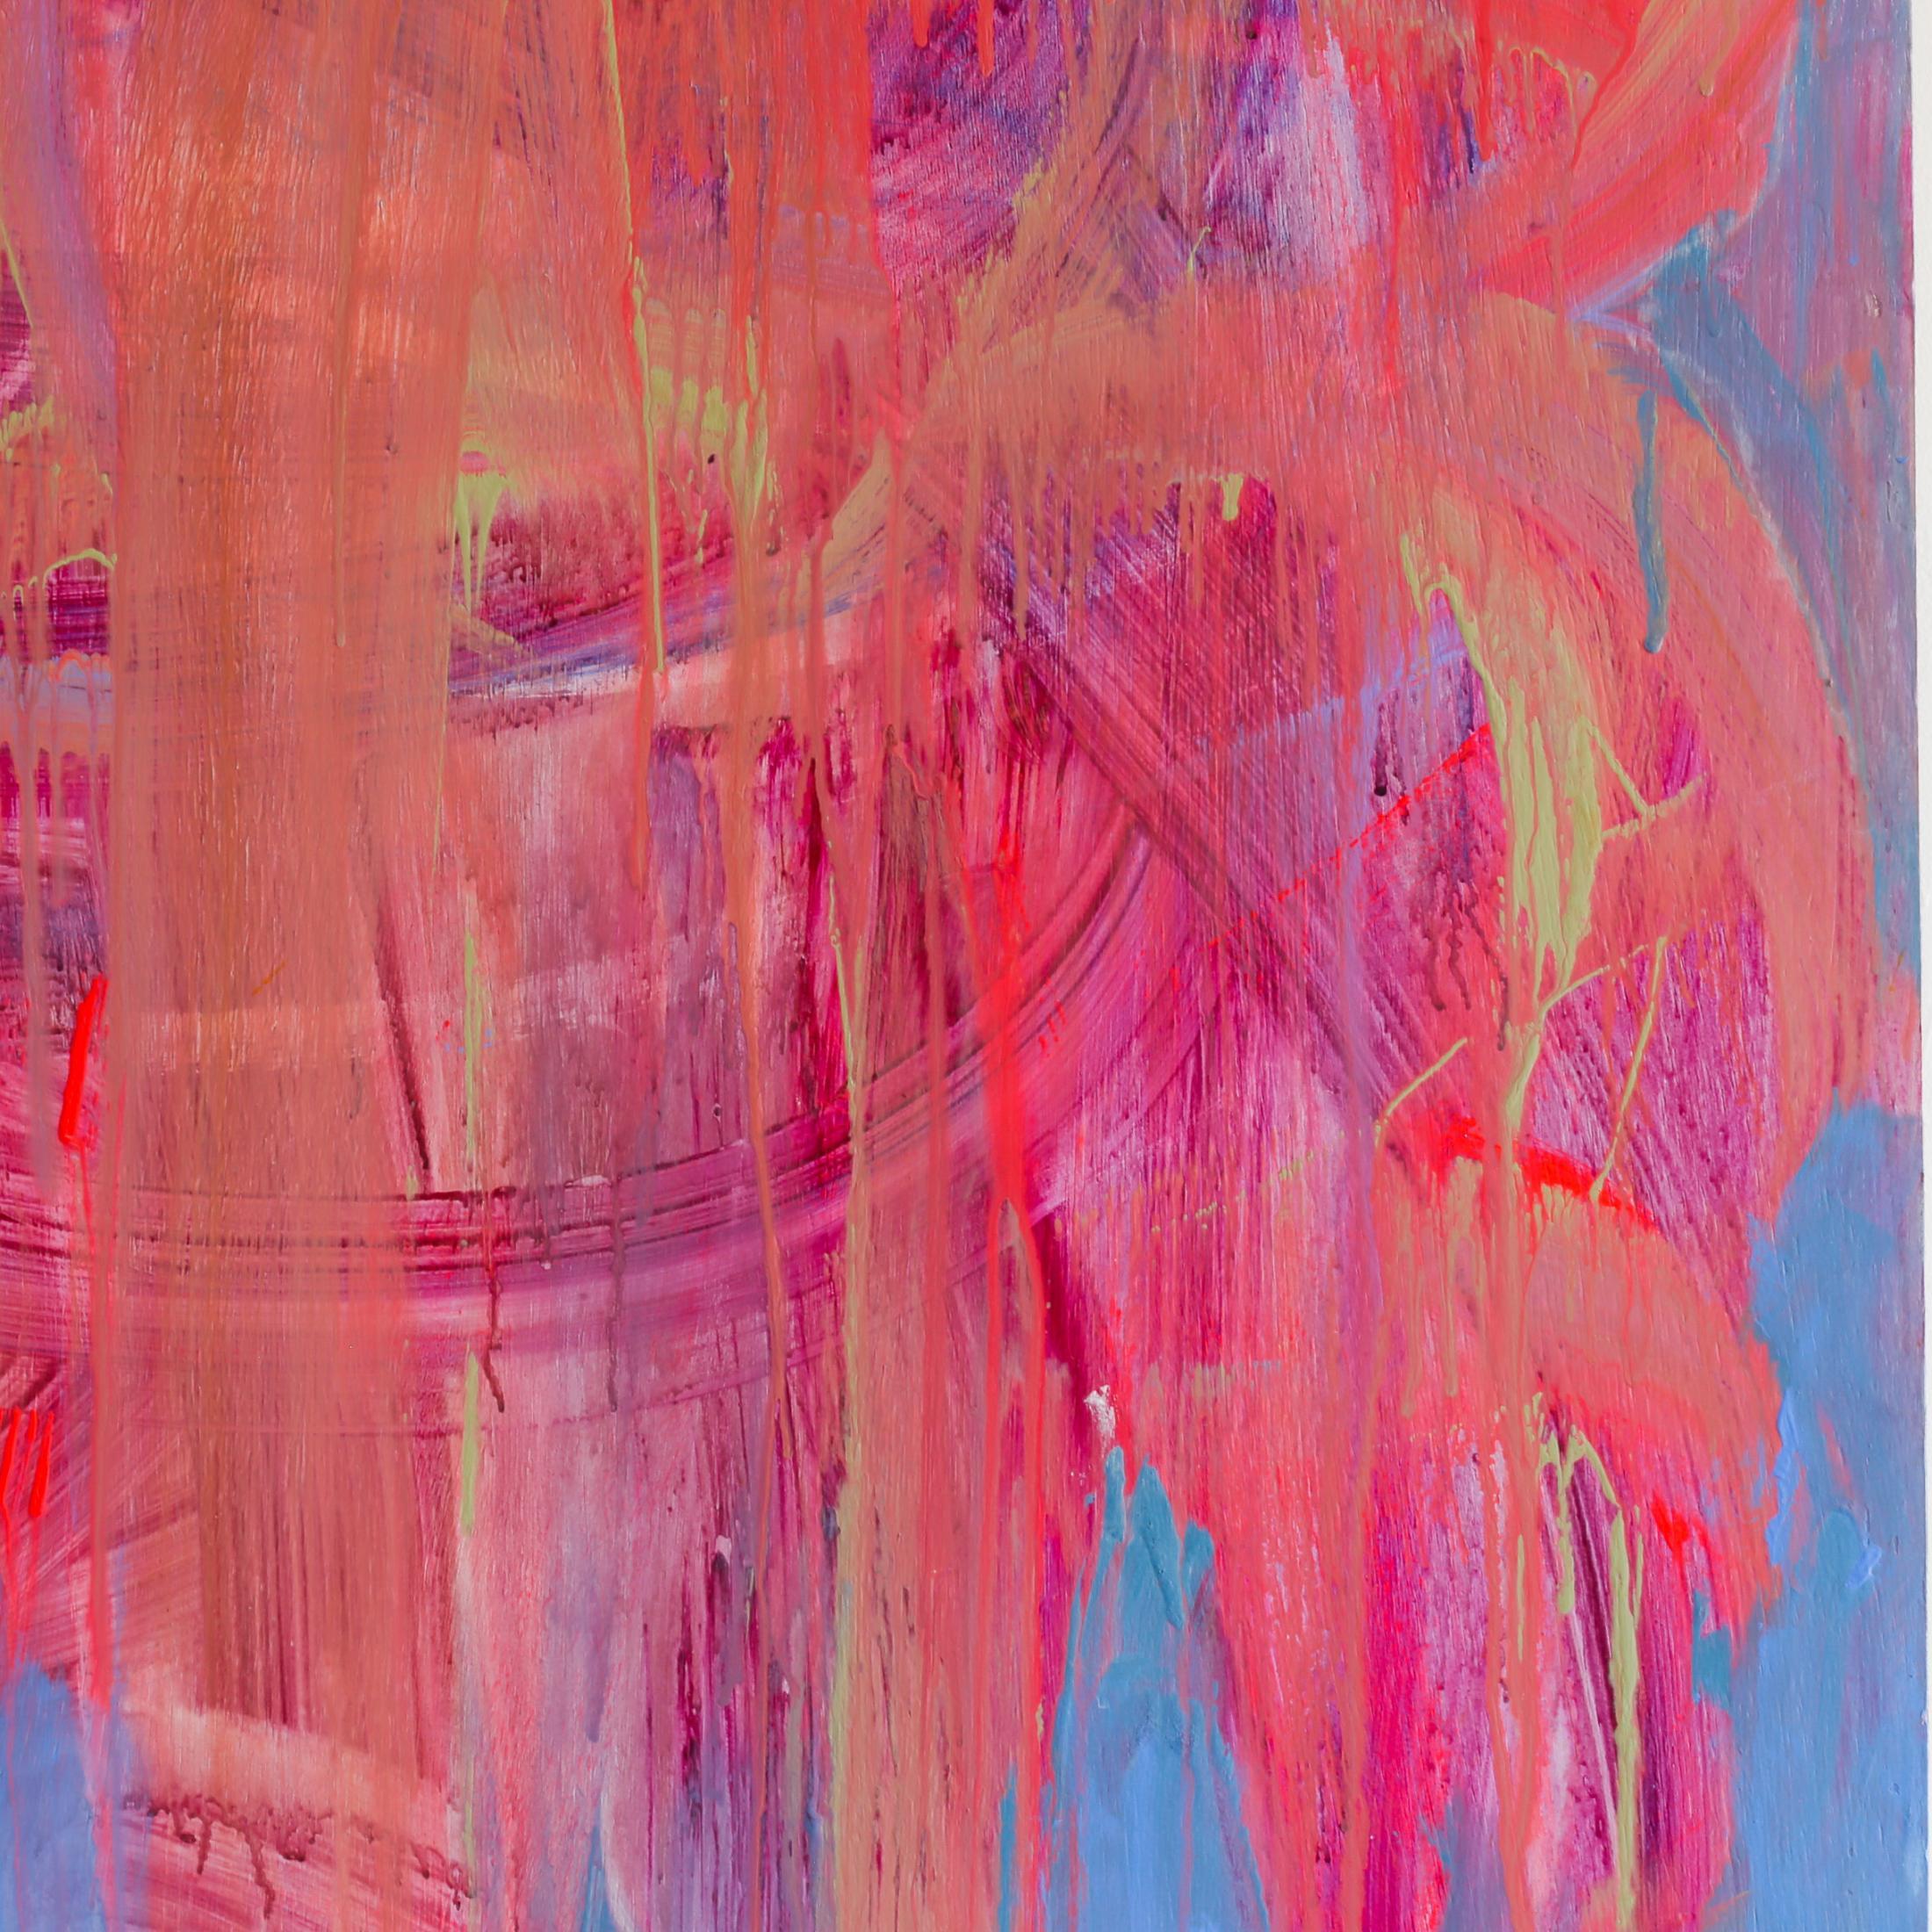 Yum II by artist Brenda Zappitell is a pink and light ingigo contemporary abstract made of flashe and Acrylic with cold wax on panel 50 x 50 and is priced at $14,000.

Brenda Zappitell creates abstract expressionist works not only born out of